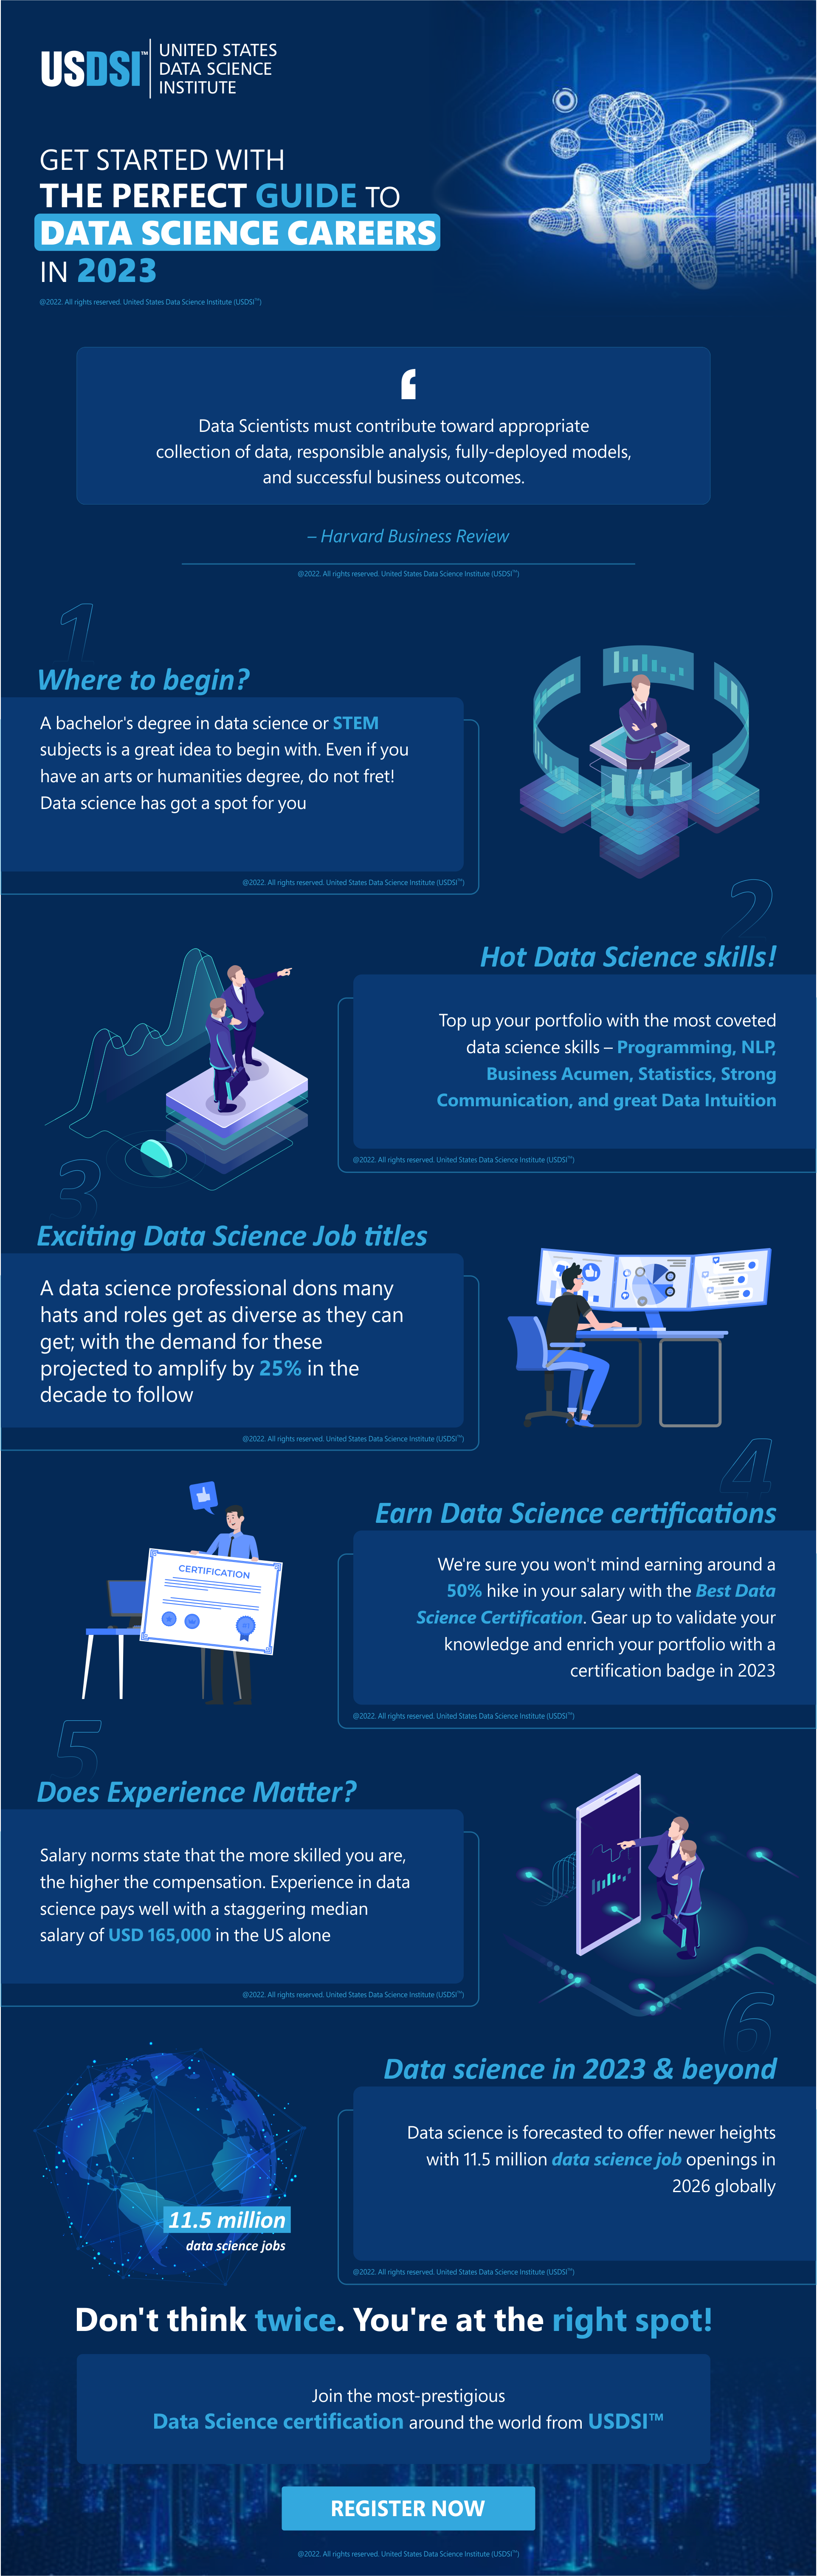 Get Started With The Perfect Guide To Data Science Careers In 2023